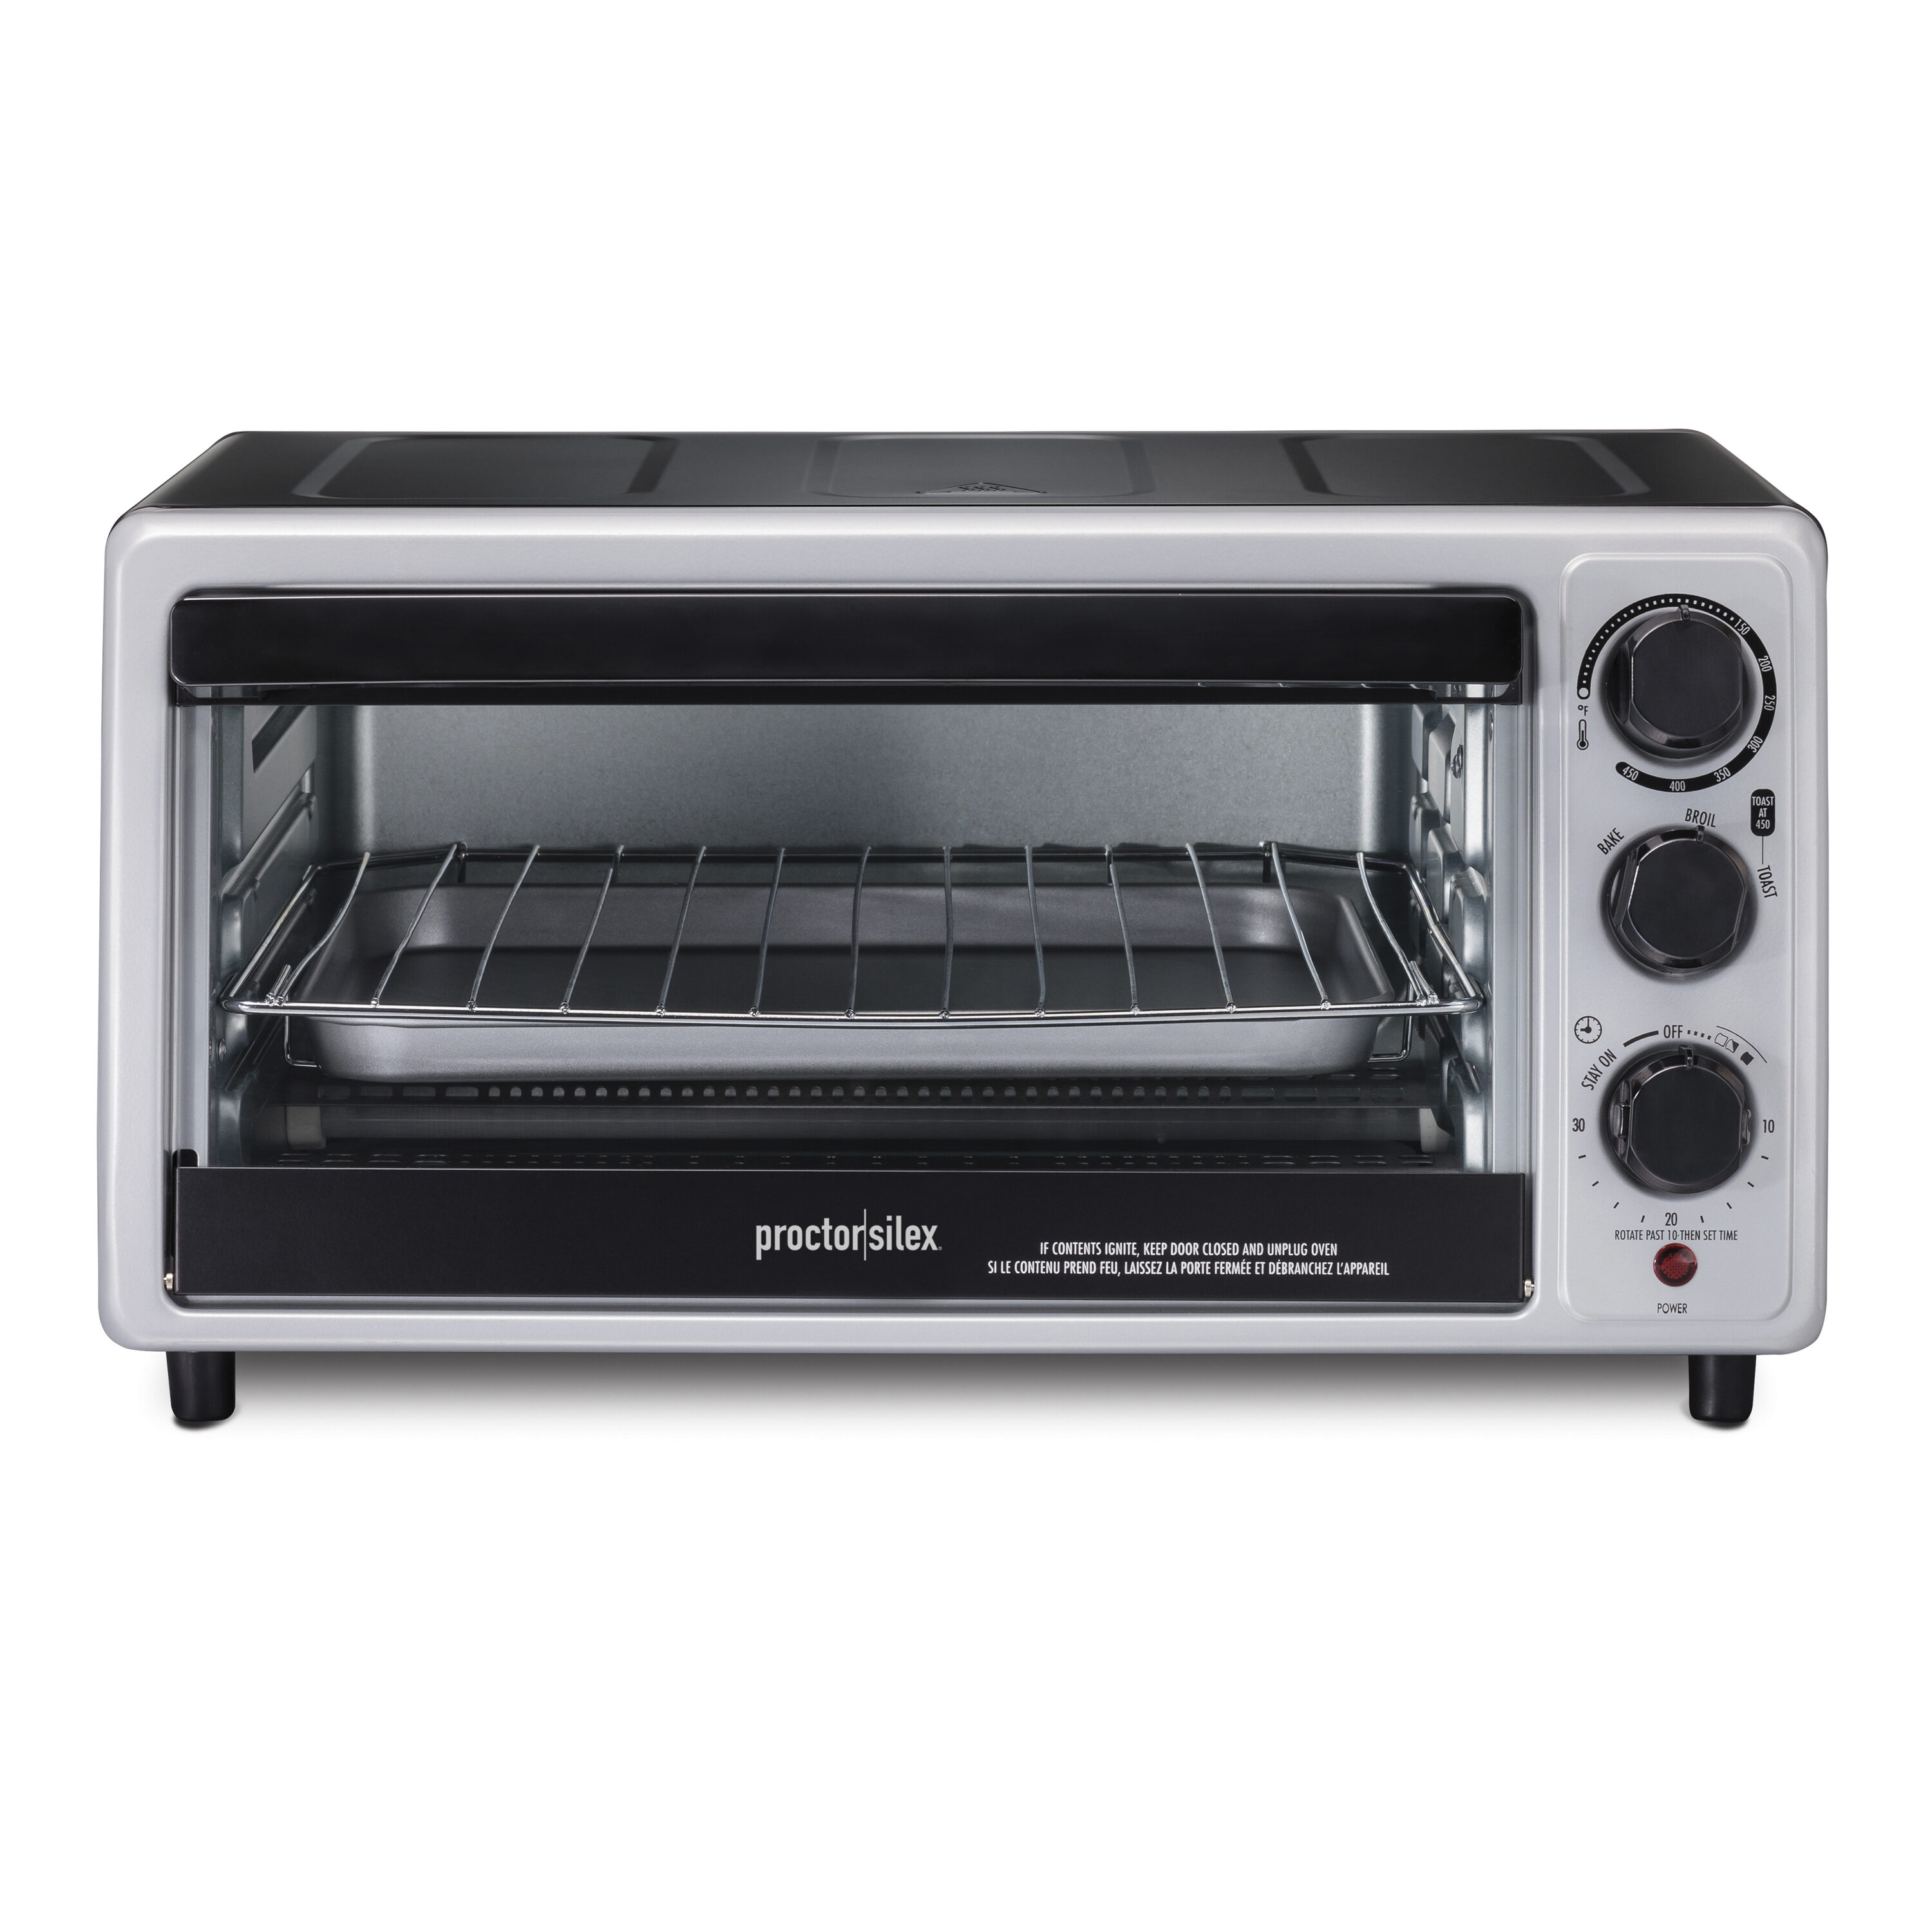 Deco Chef 24 qt Stainless Steel Countertop 1700 Watt Toaster Oven with Built-in Air Fryer and Included Rotisserie Assembly, Grill Rack, Frying